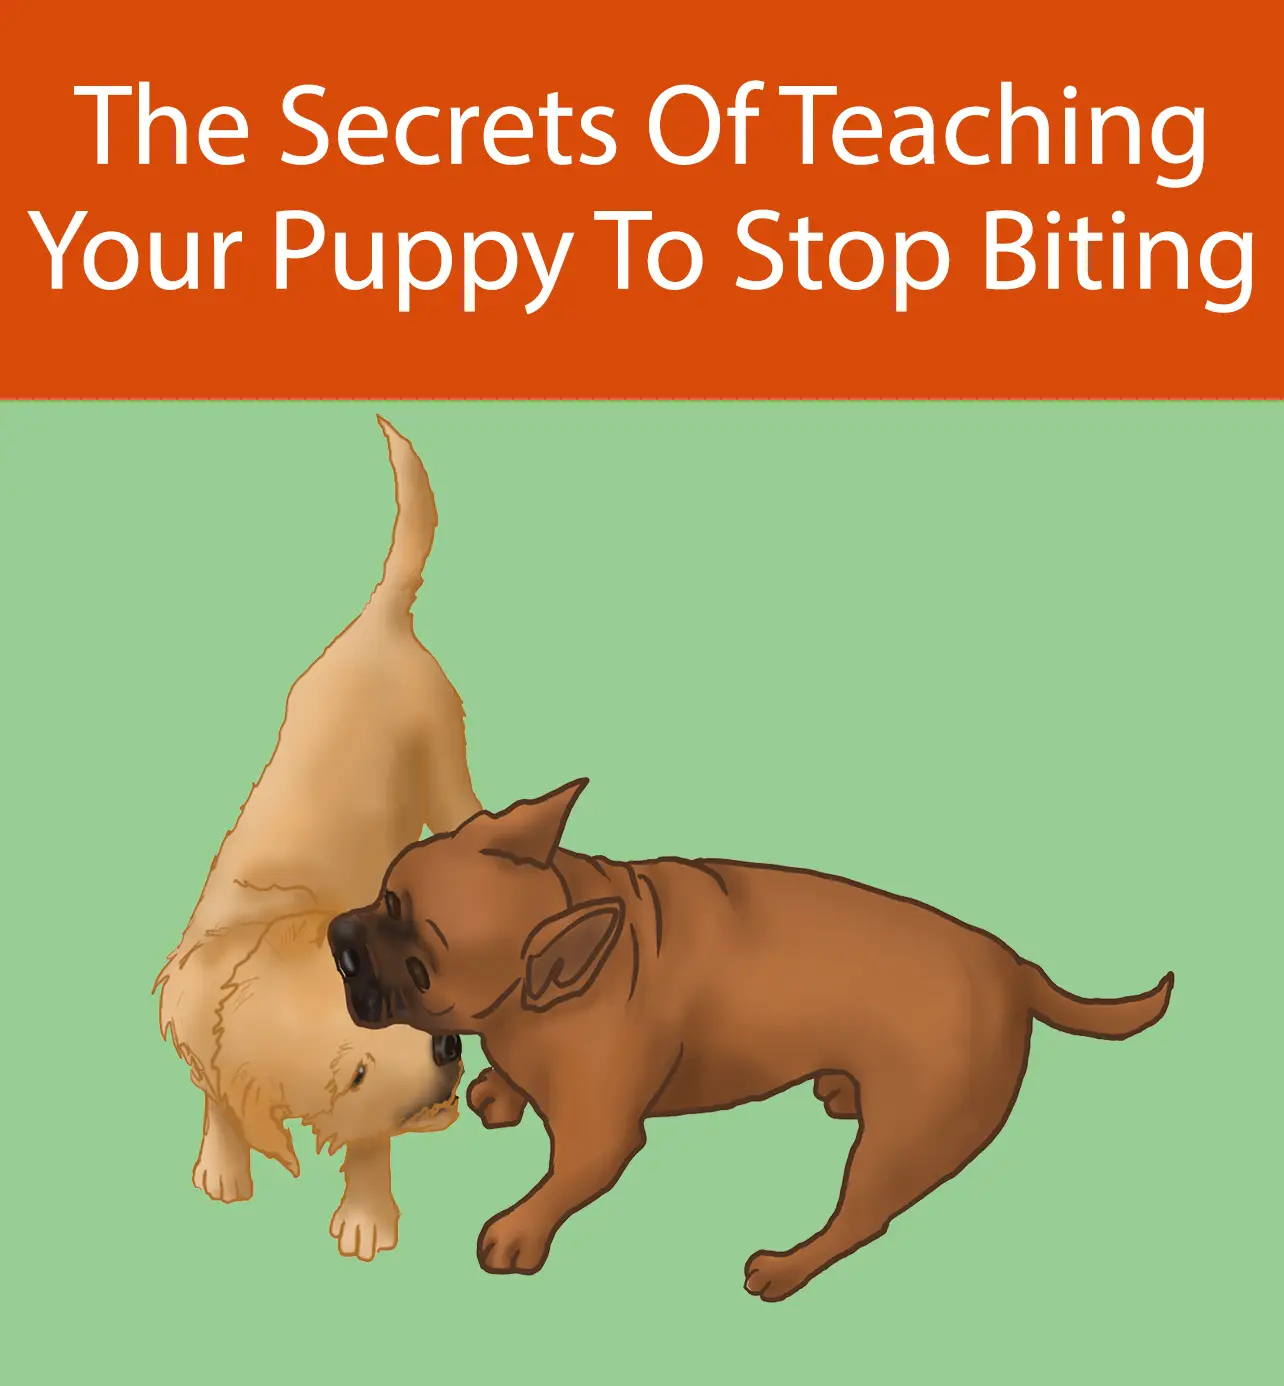 The Secrets Of Teaching Your Puppy To Stop Biting